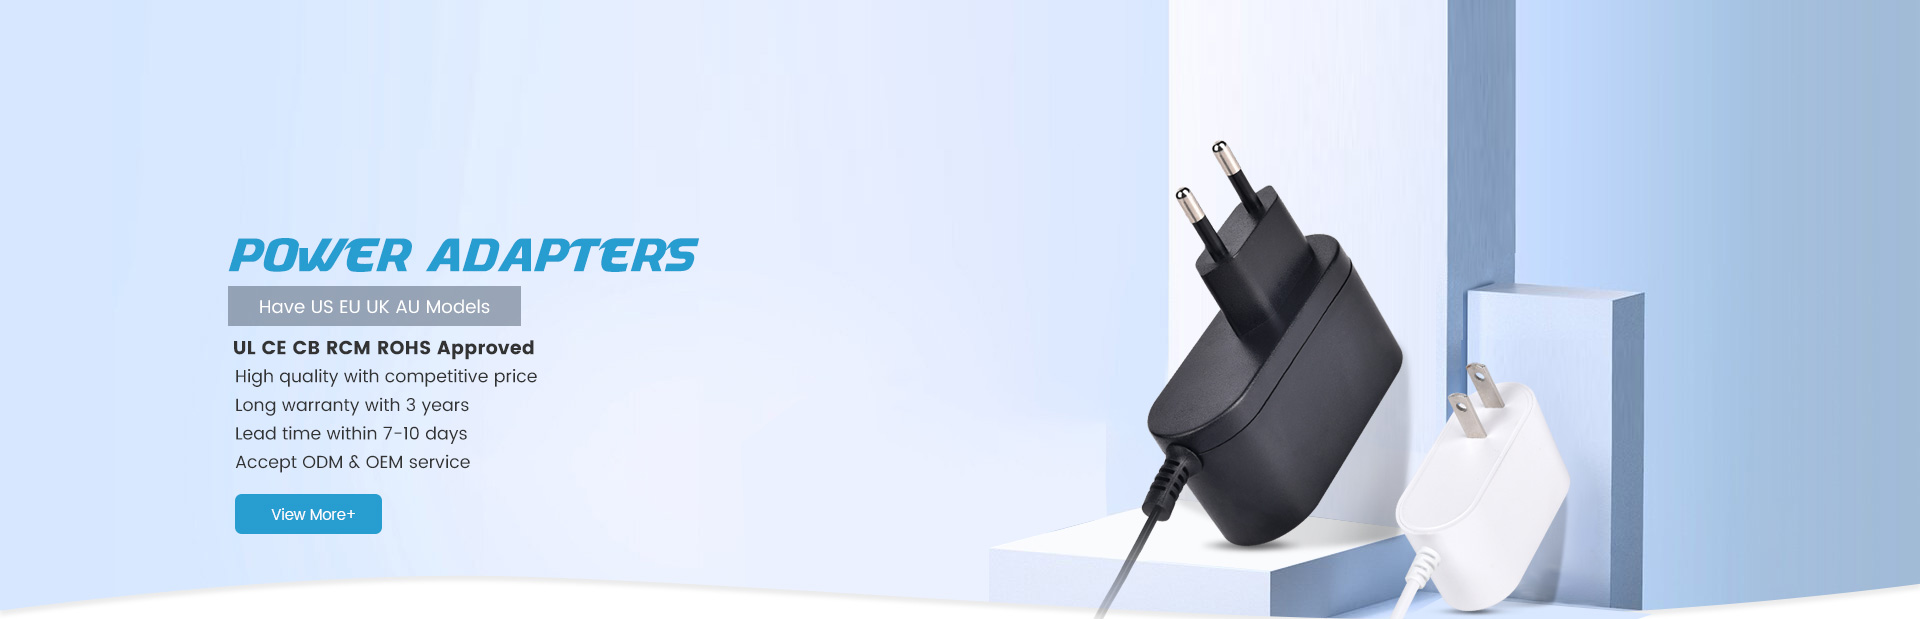 Wall Power Adapters